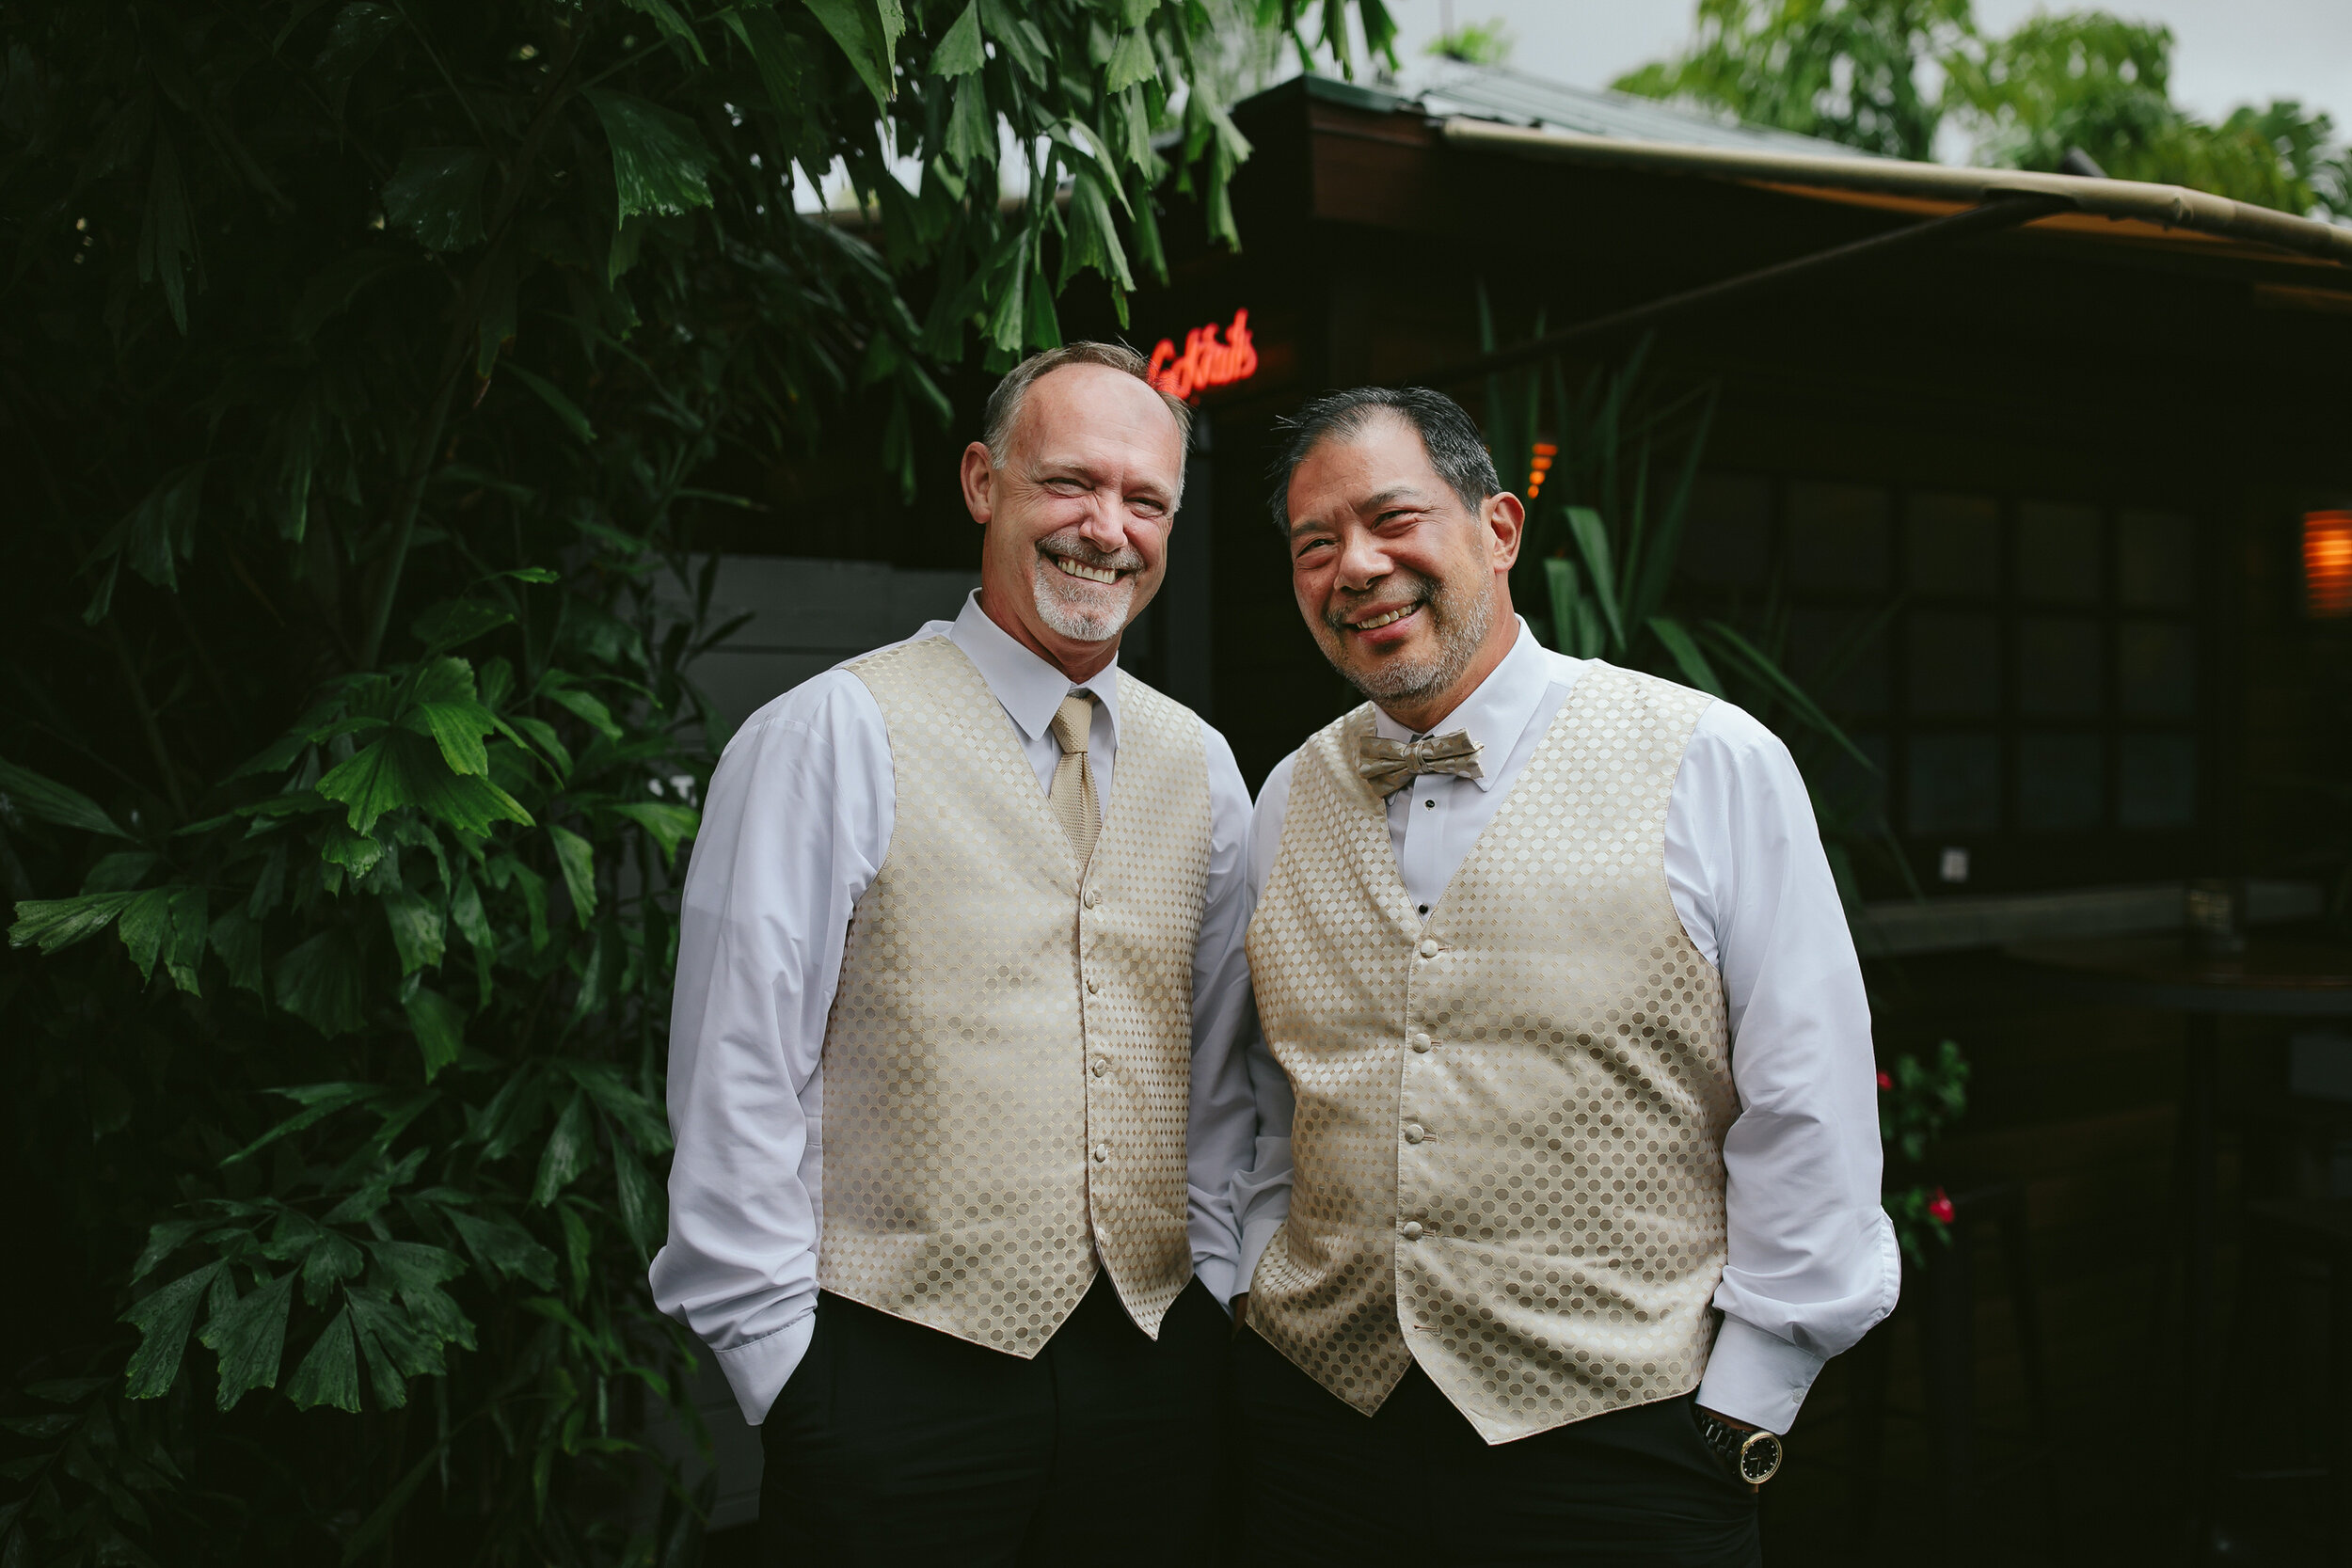 Two-Grooms-Elopement-Drynk-Wilton-Manors-Fort-Lauderdale